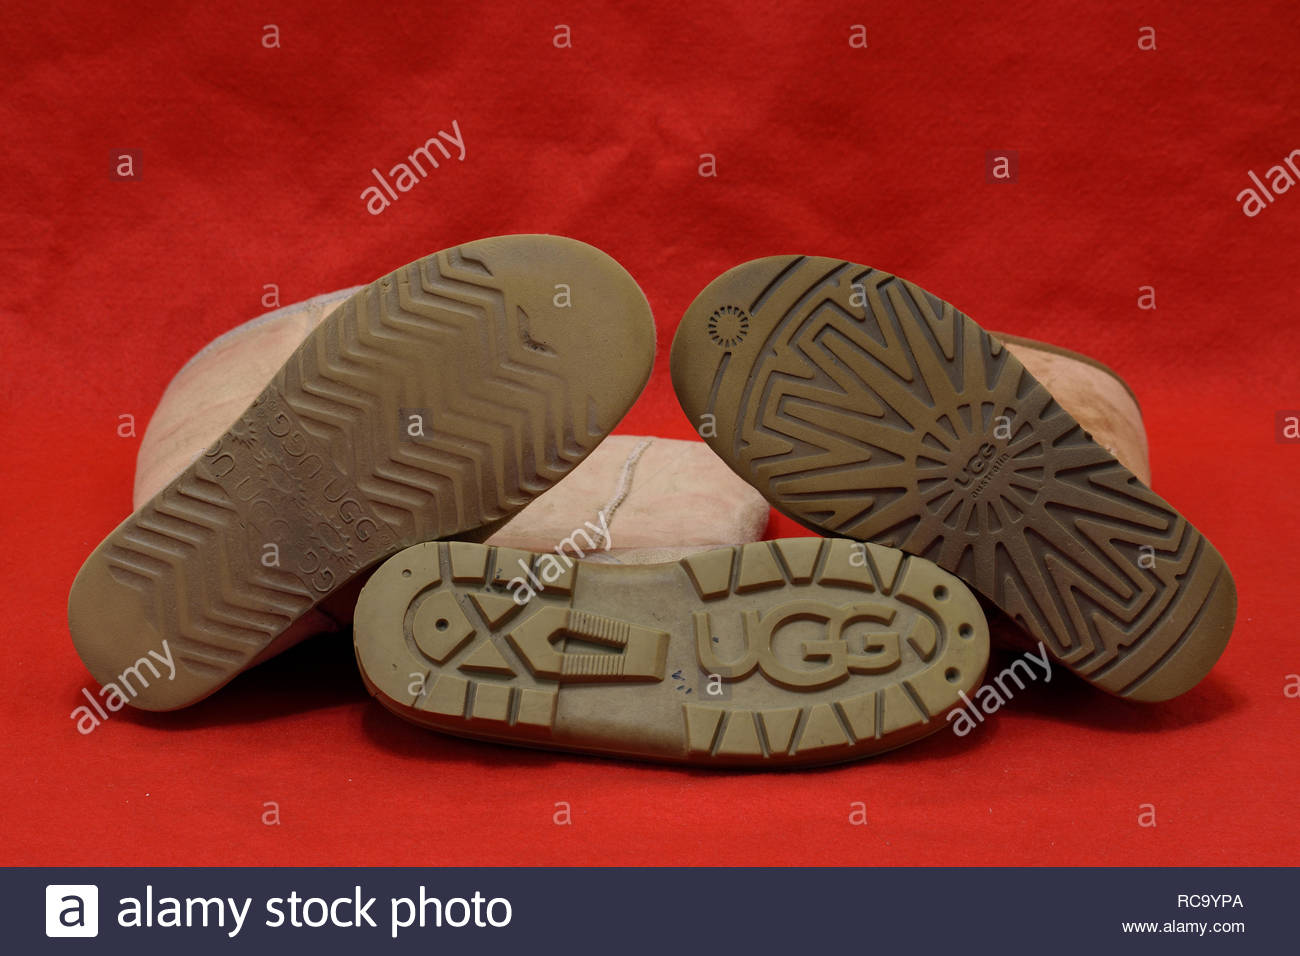 ugg boot insoles